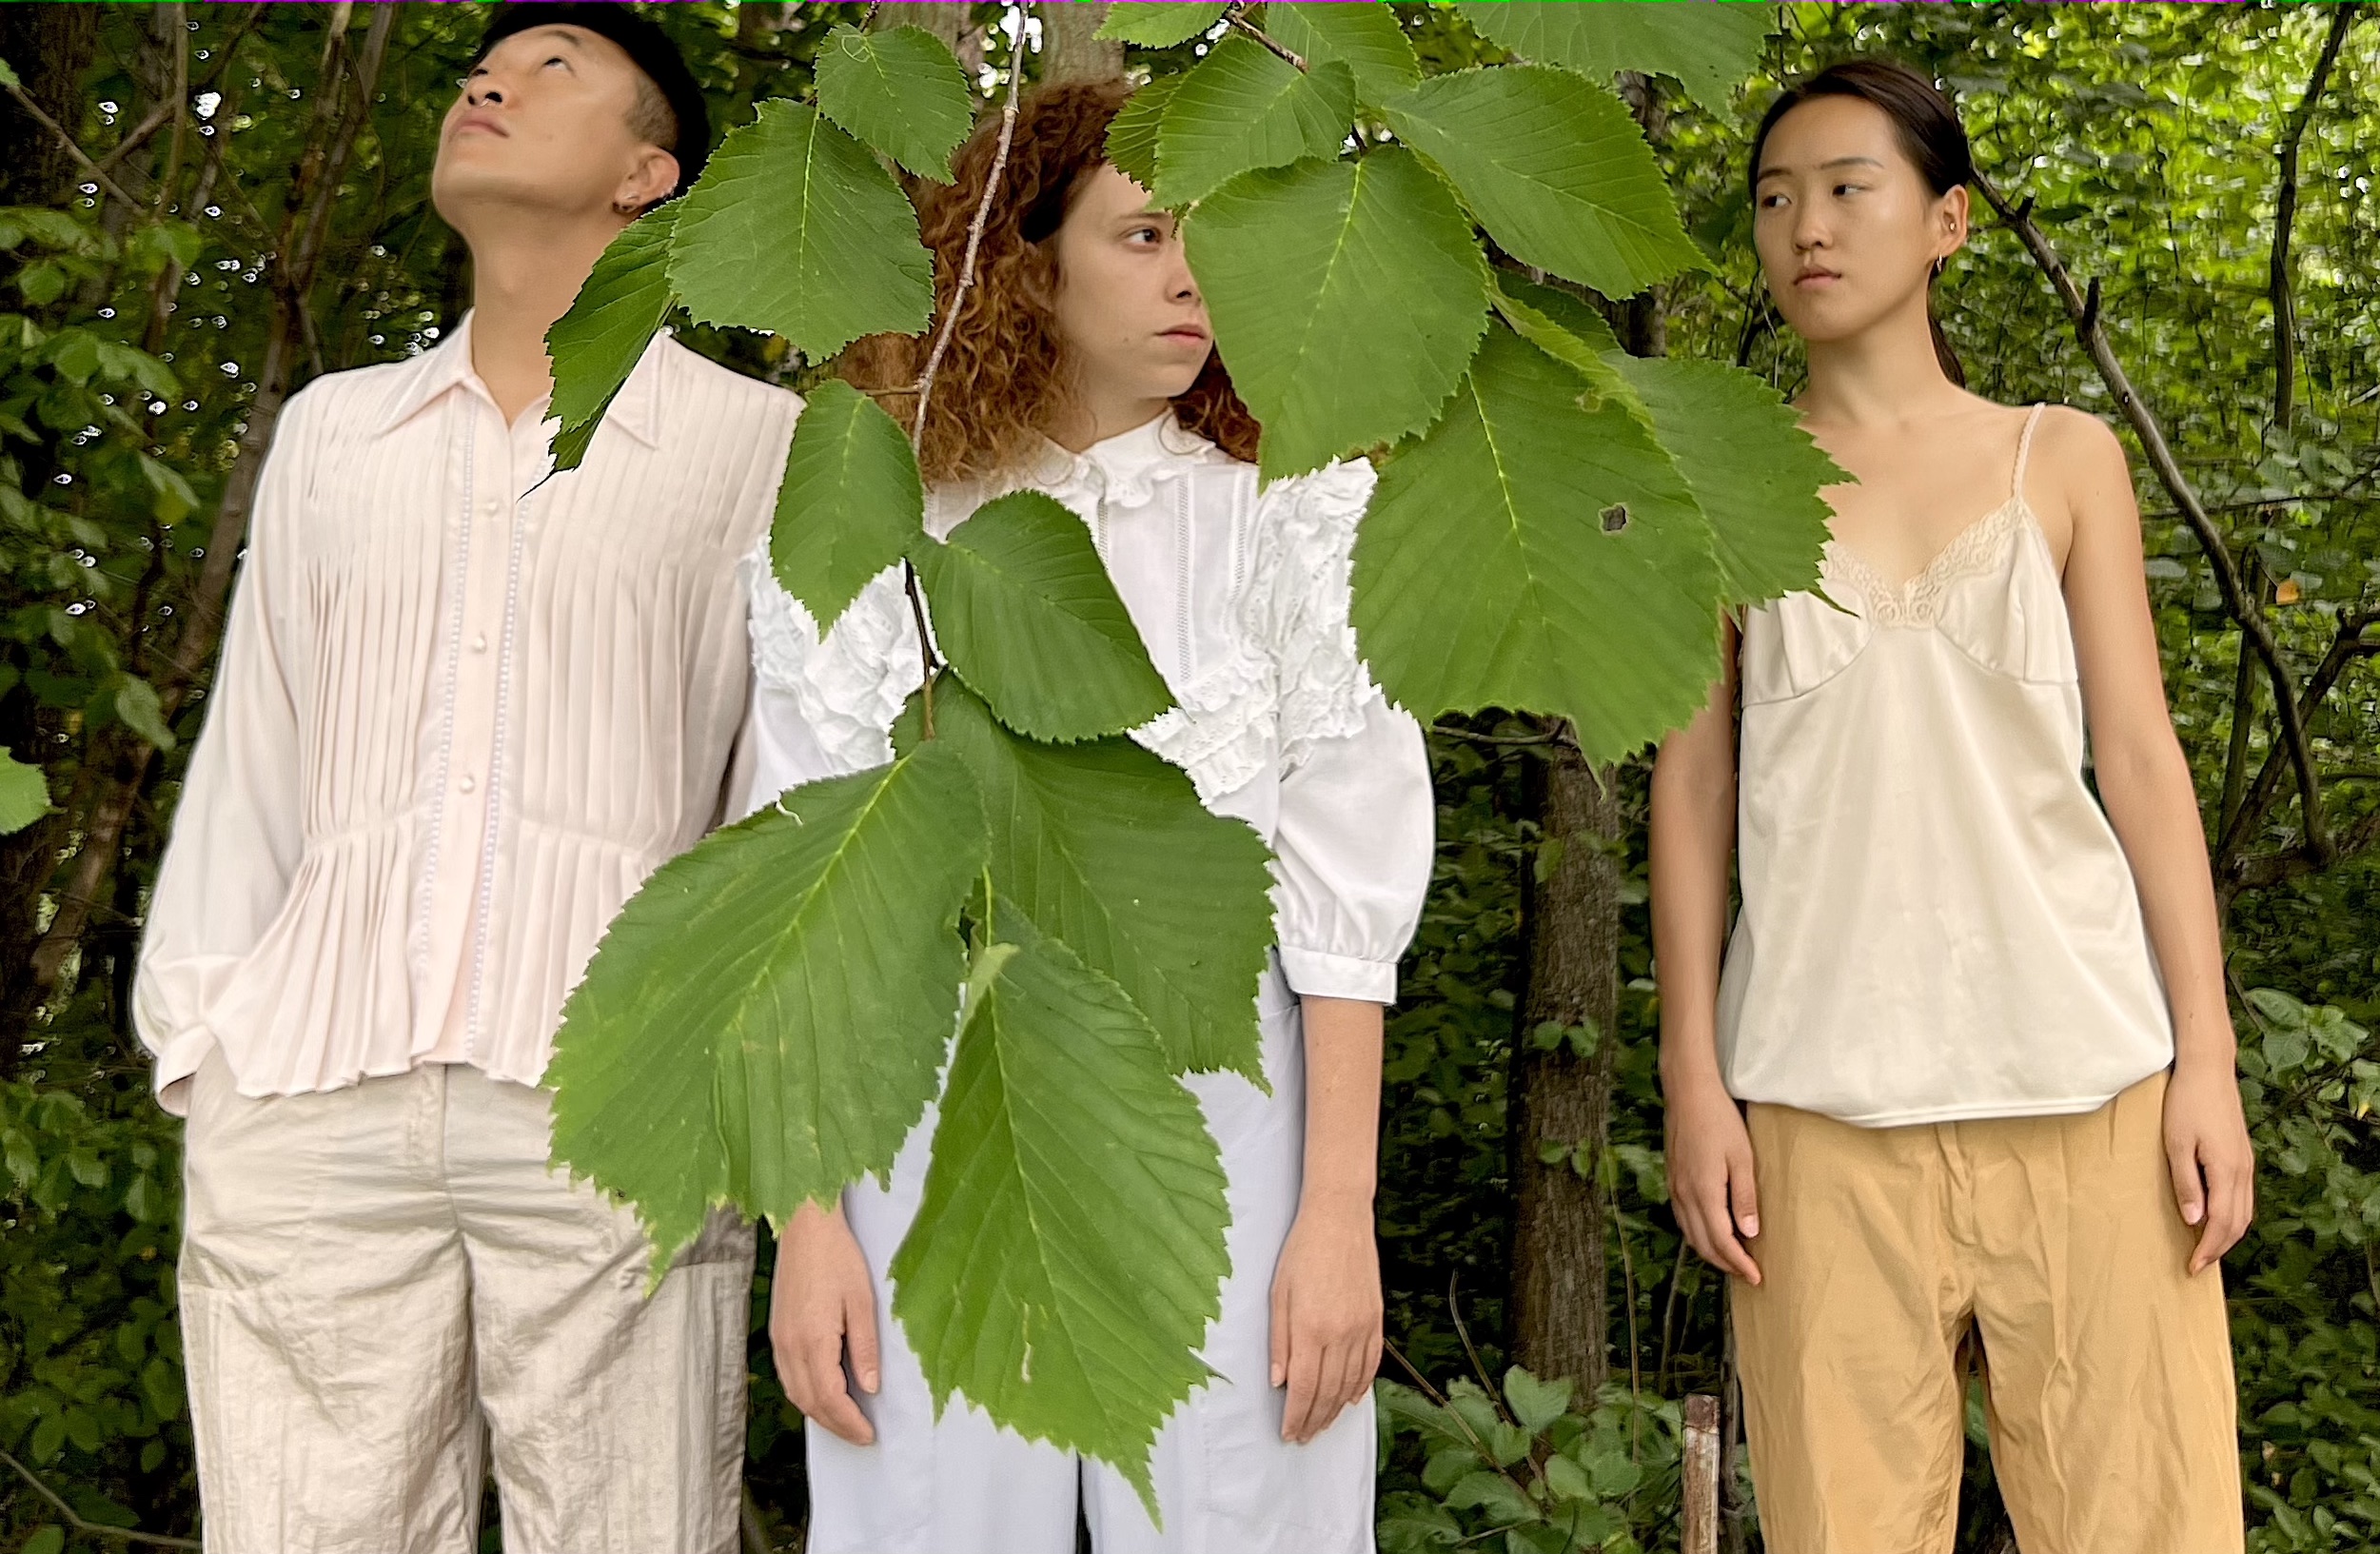 Three people stand in a green thicket, the leaves of a tree form the foreground.